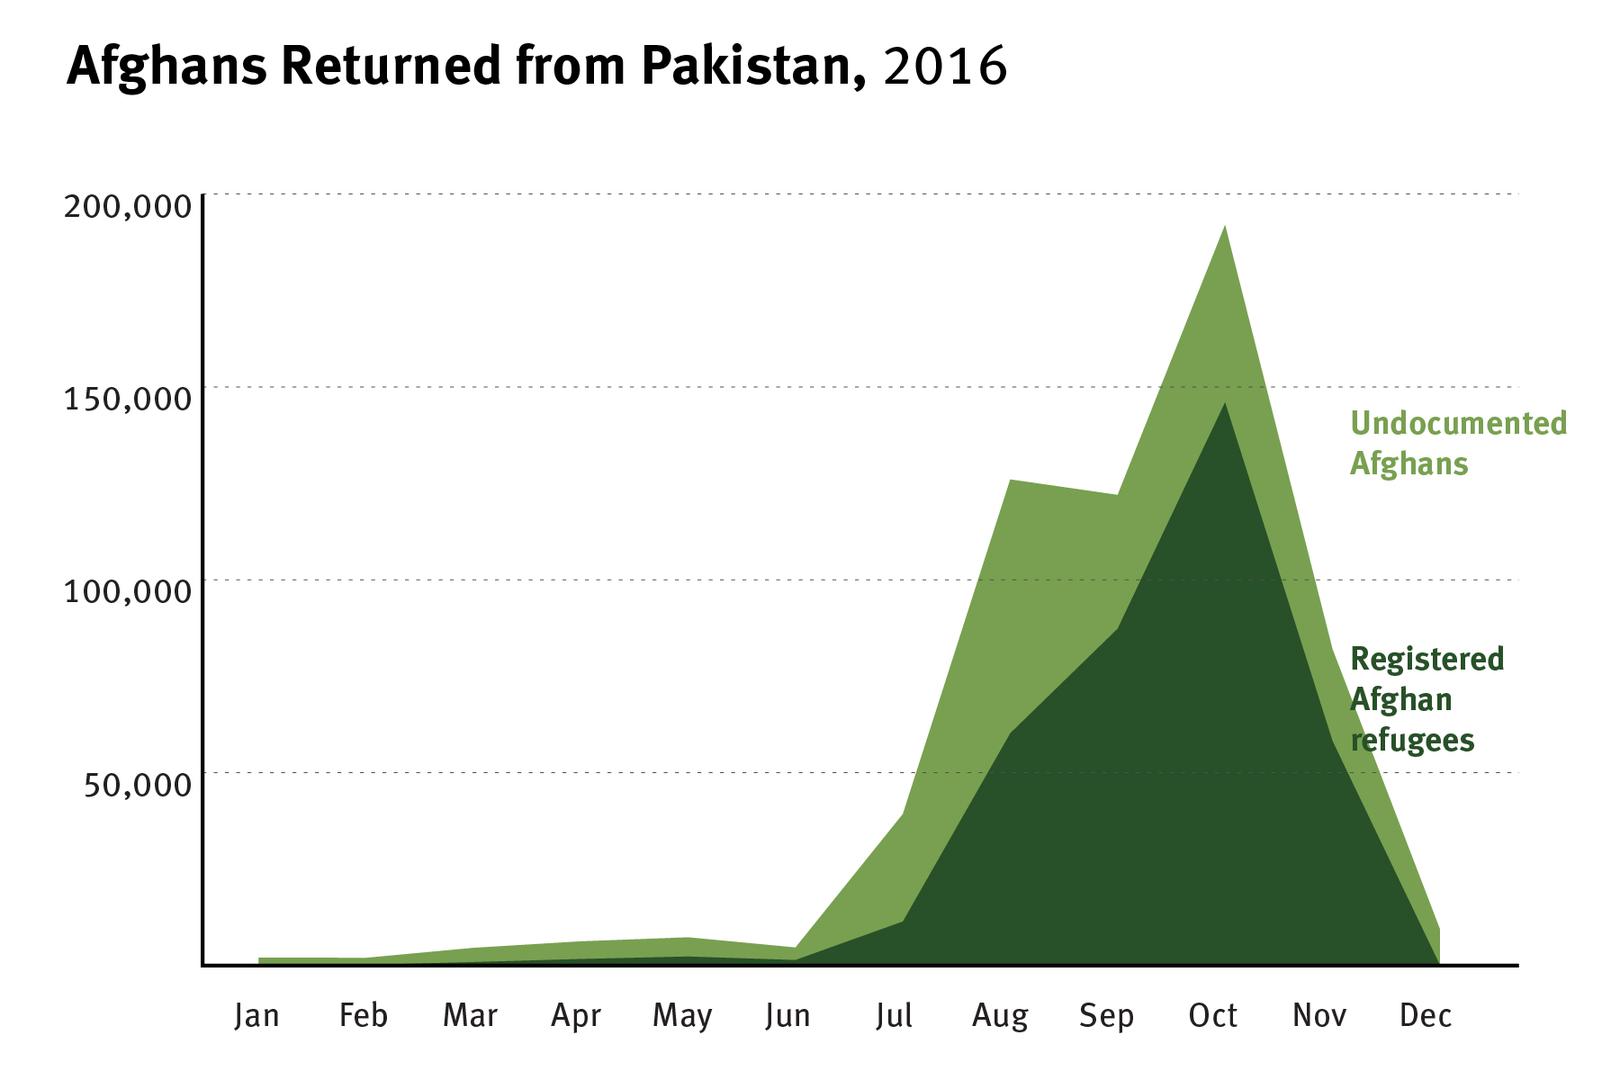 Graph of Afghans returned from Pakistan in 2016